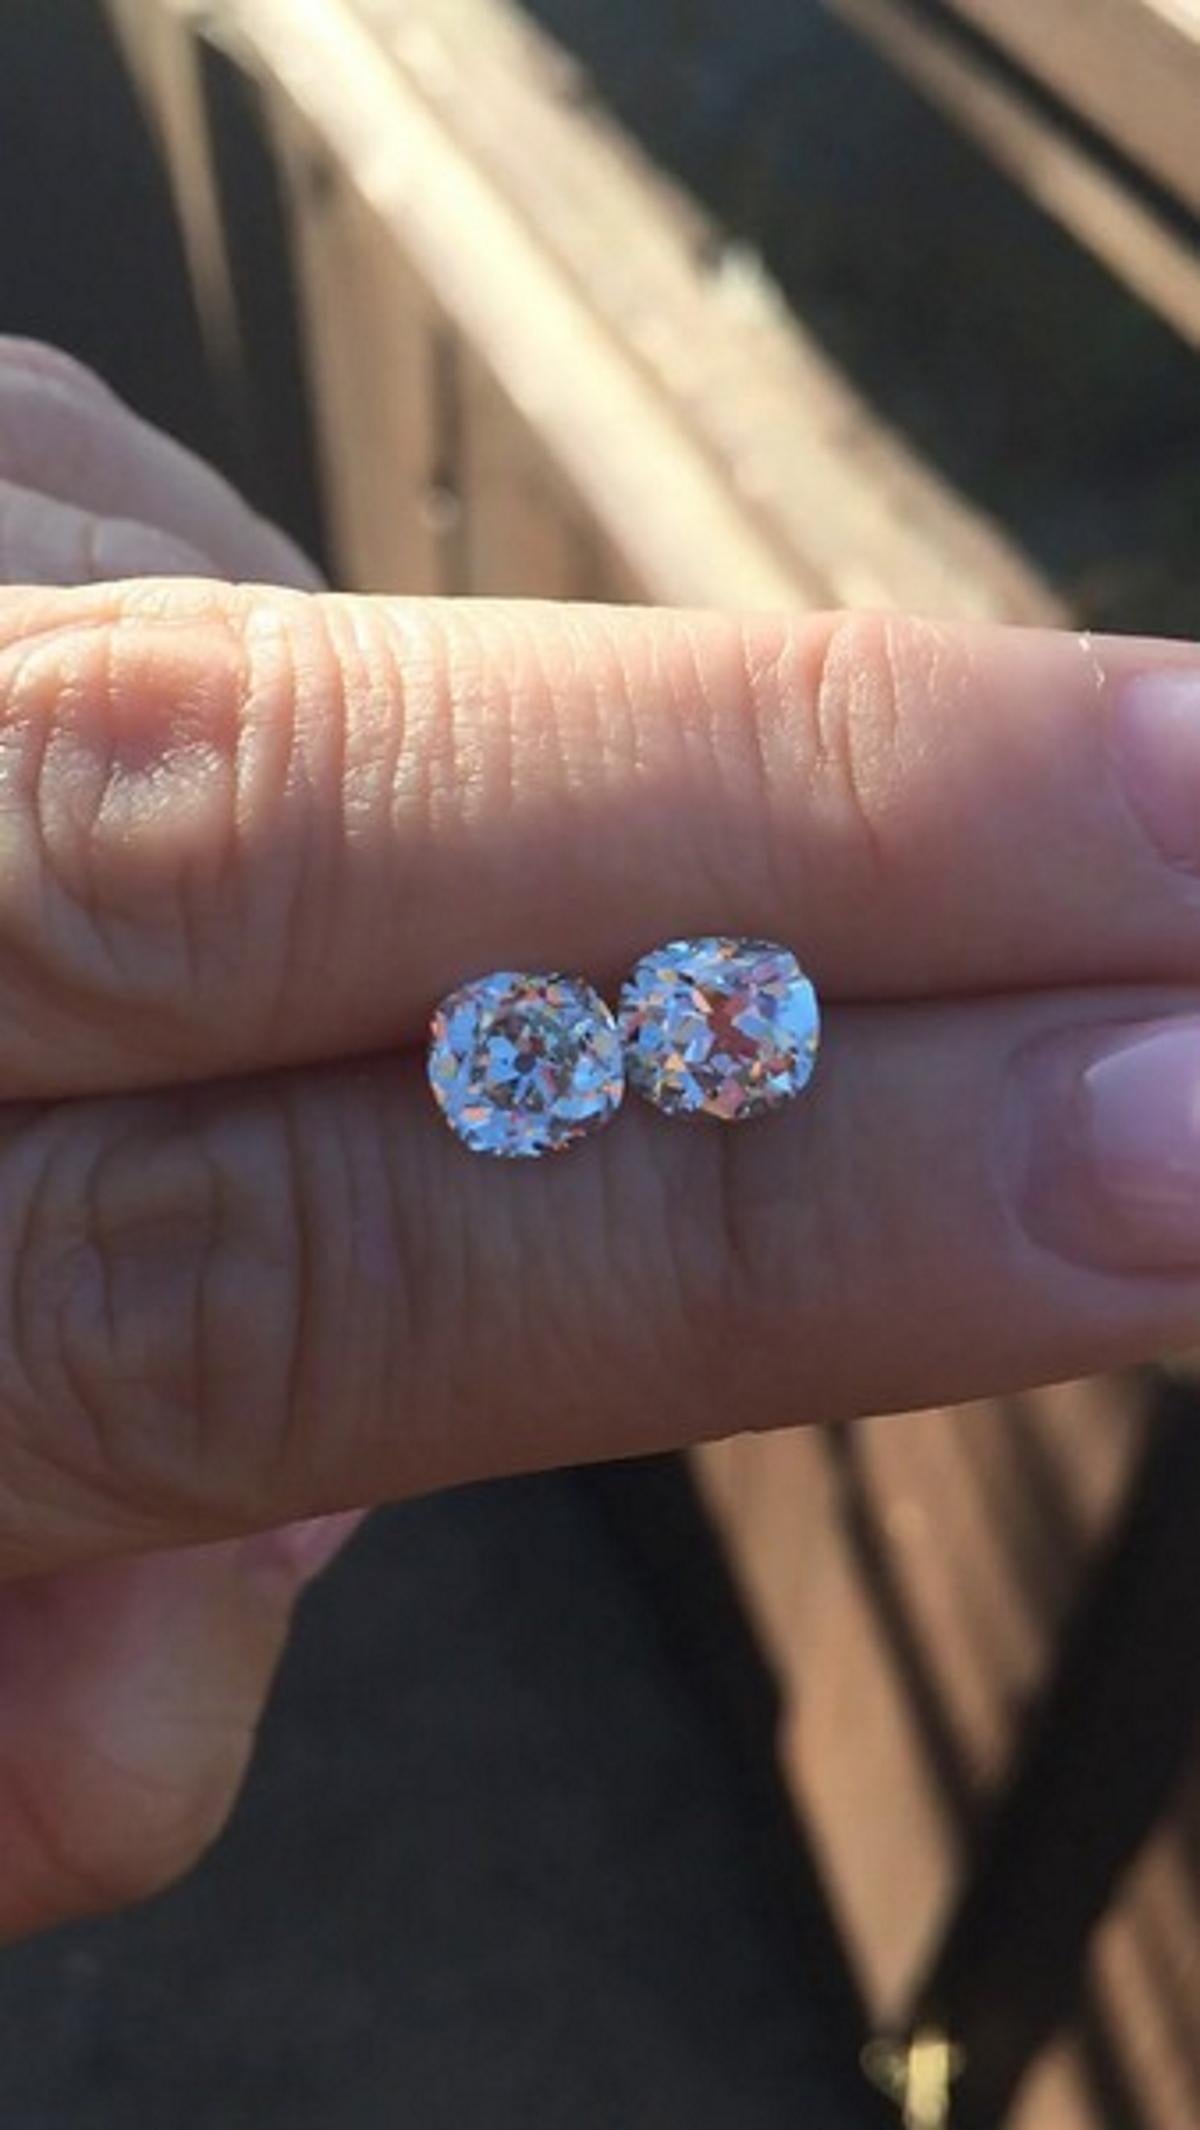 This gorgeous and rare 2.01ctw antique matched pair of old mine cut diamonds is bright white, eye clean, full of old world charm, and dazzling with phenomenal sparkle! Cut by hand over a century in the past during the Victorian era, these rare